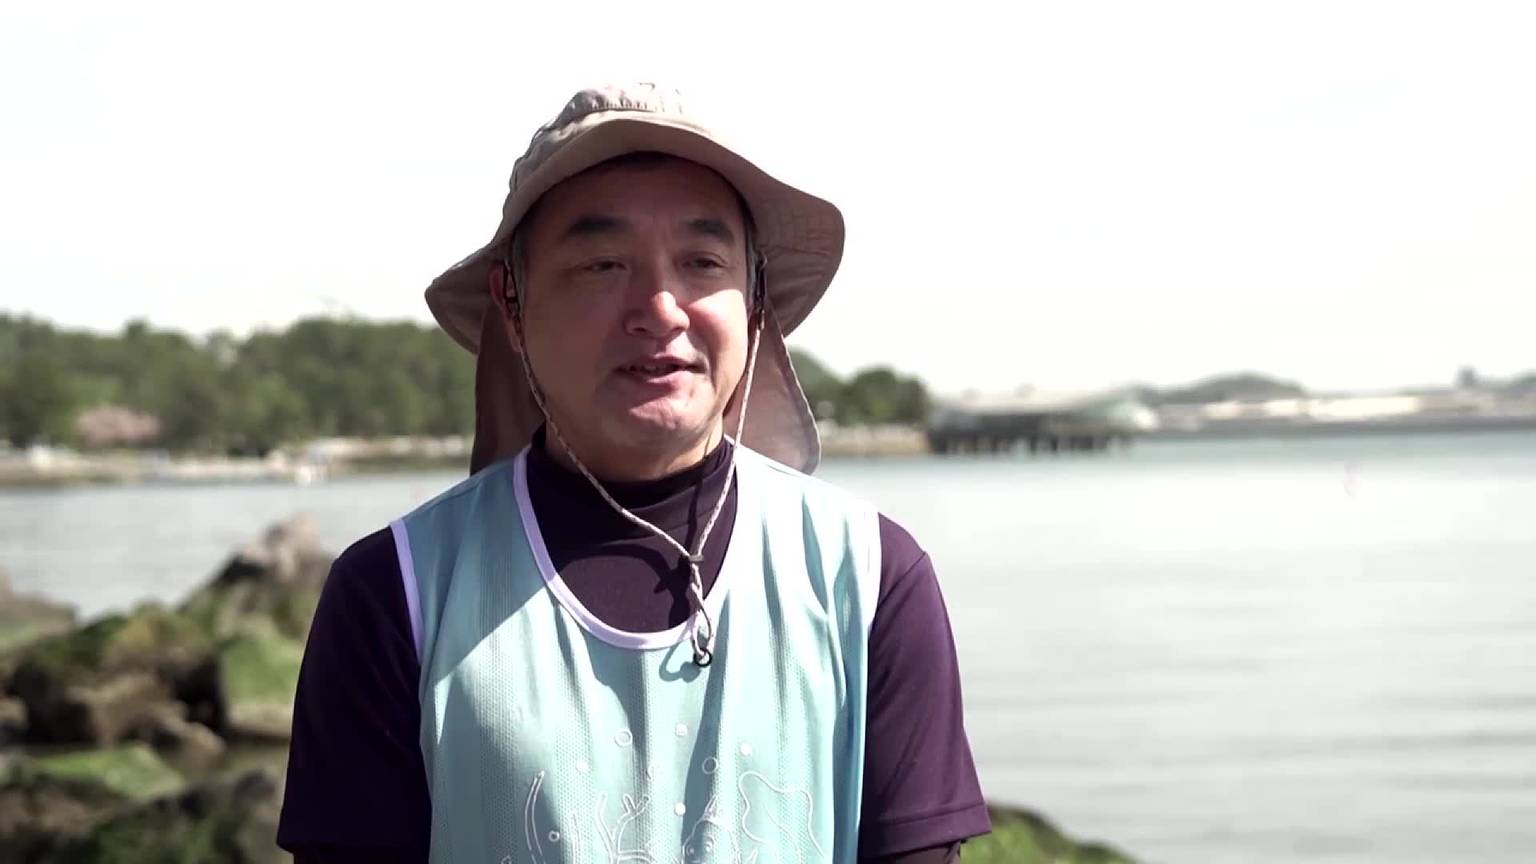 Video: Japan planting seaweed to meet its climate goals [Video]